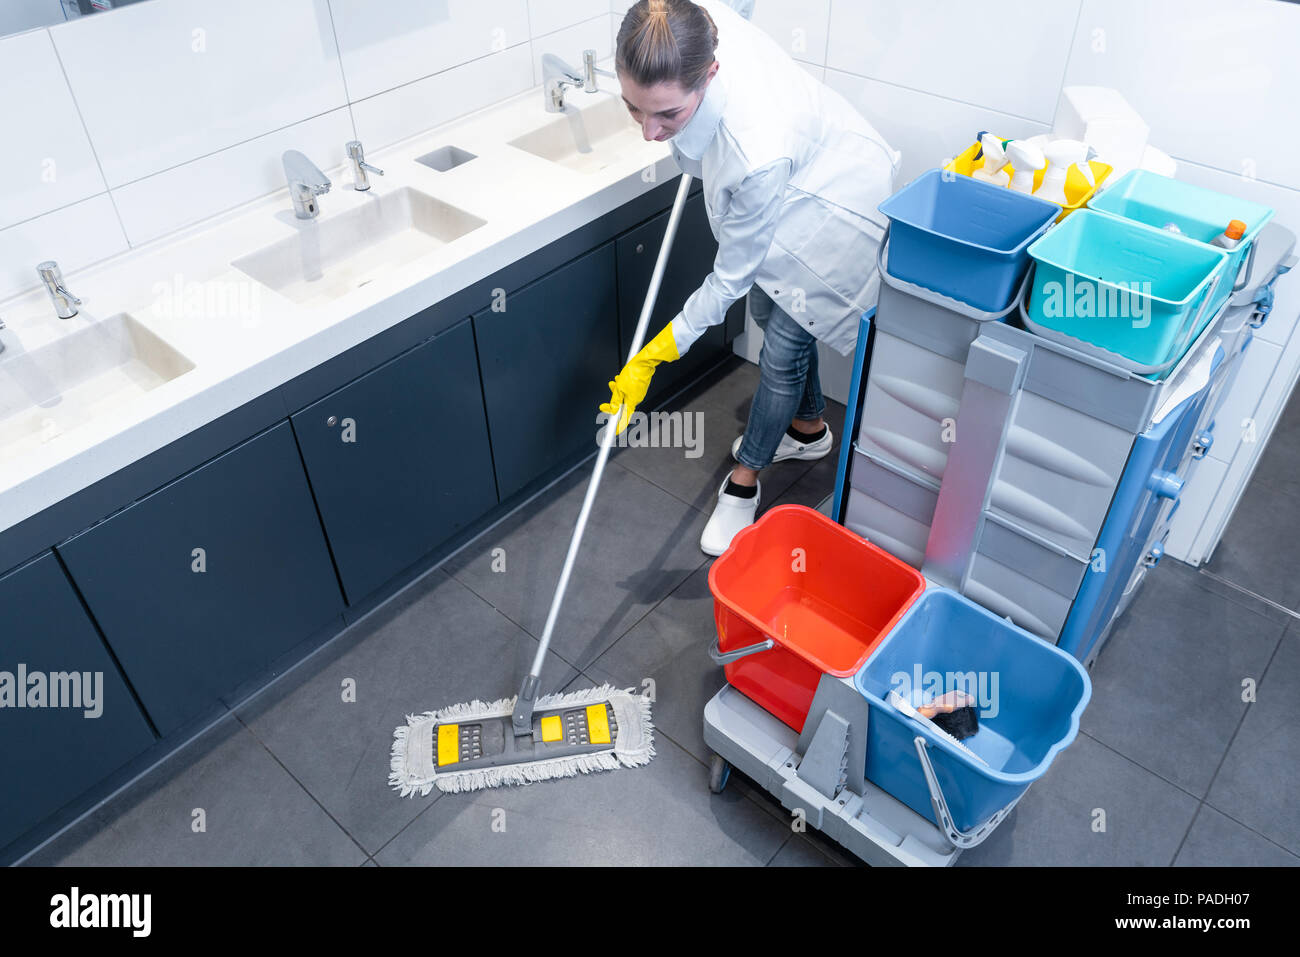 Cleaning lady mopping the floor in restroom Stock Photo